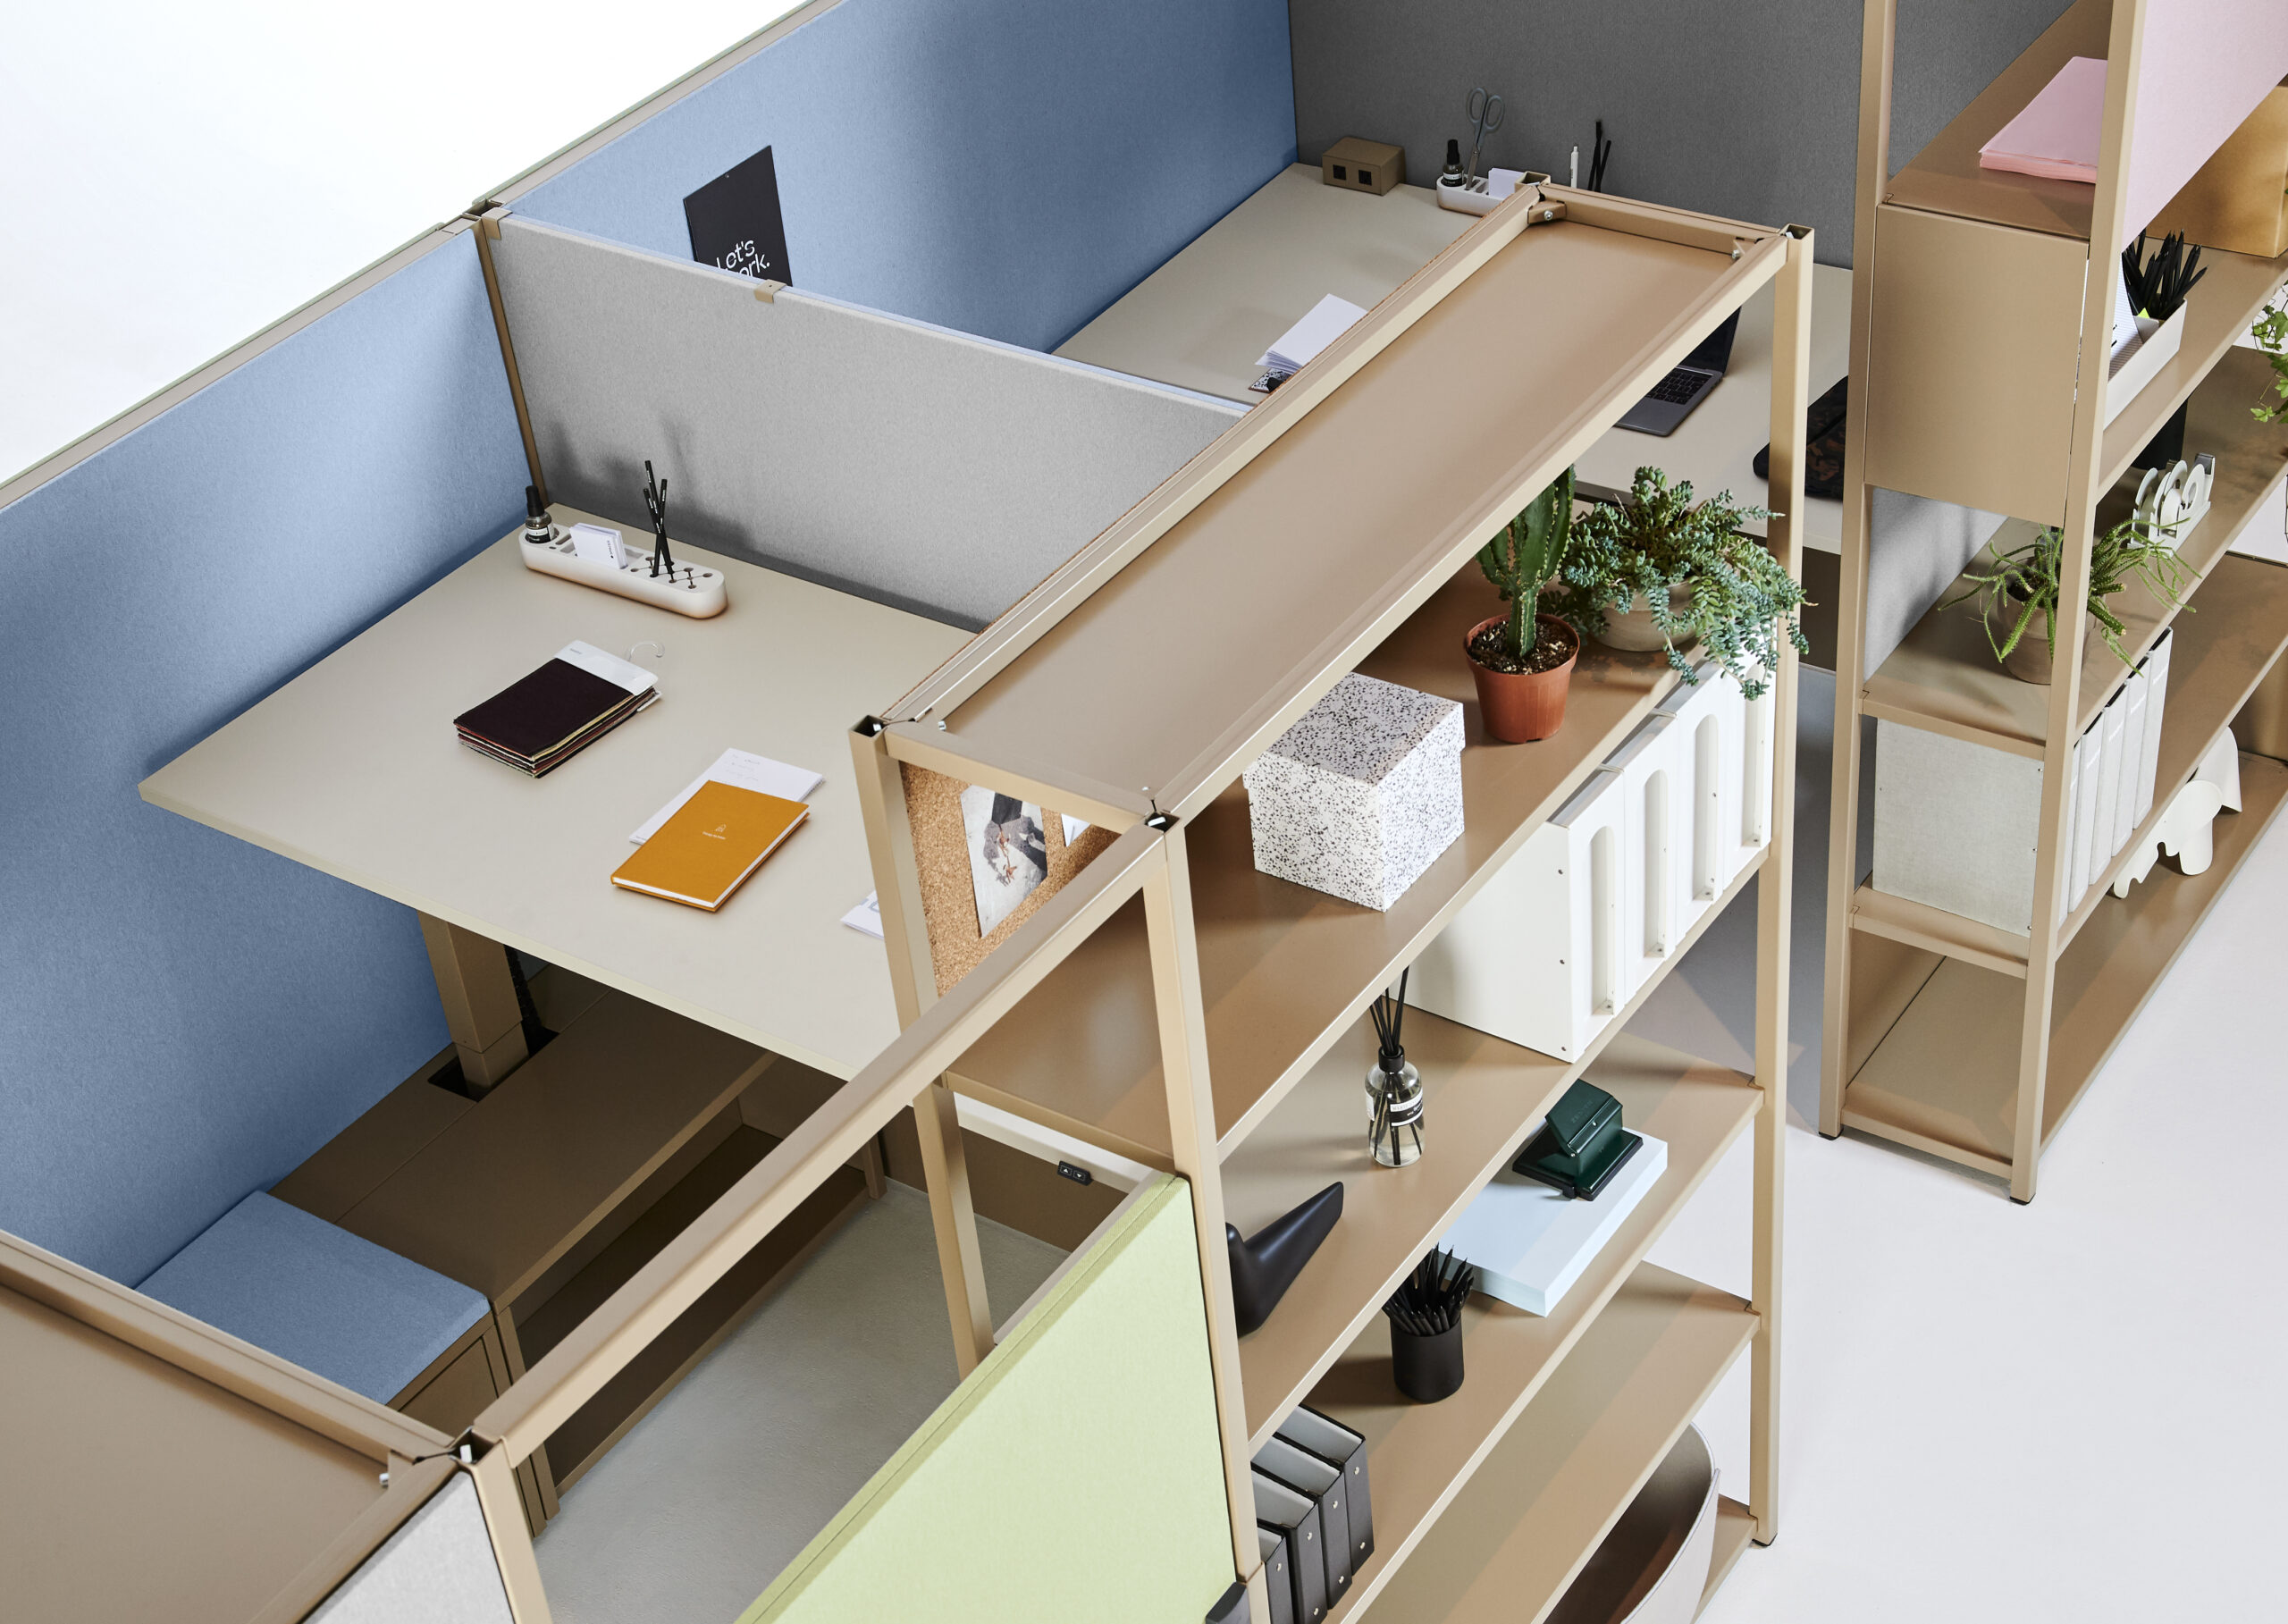 Open Desk is modular by design, reusable in various configurations and transported as a kit-of-parts, as a conscious choice to preserve the planet.